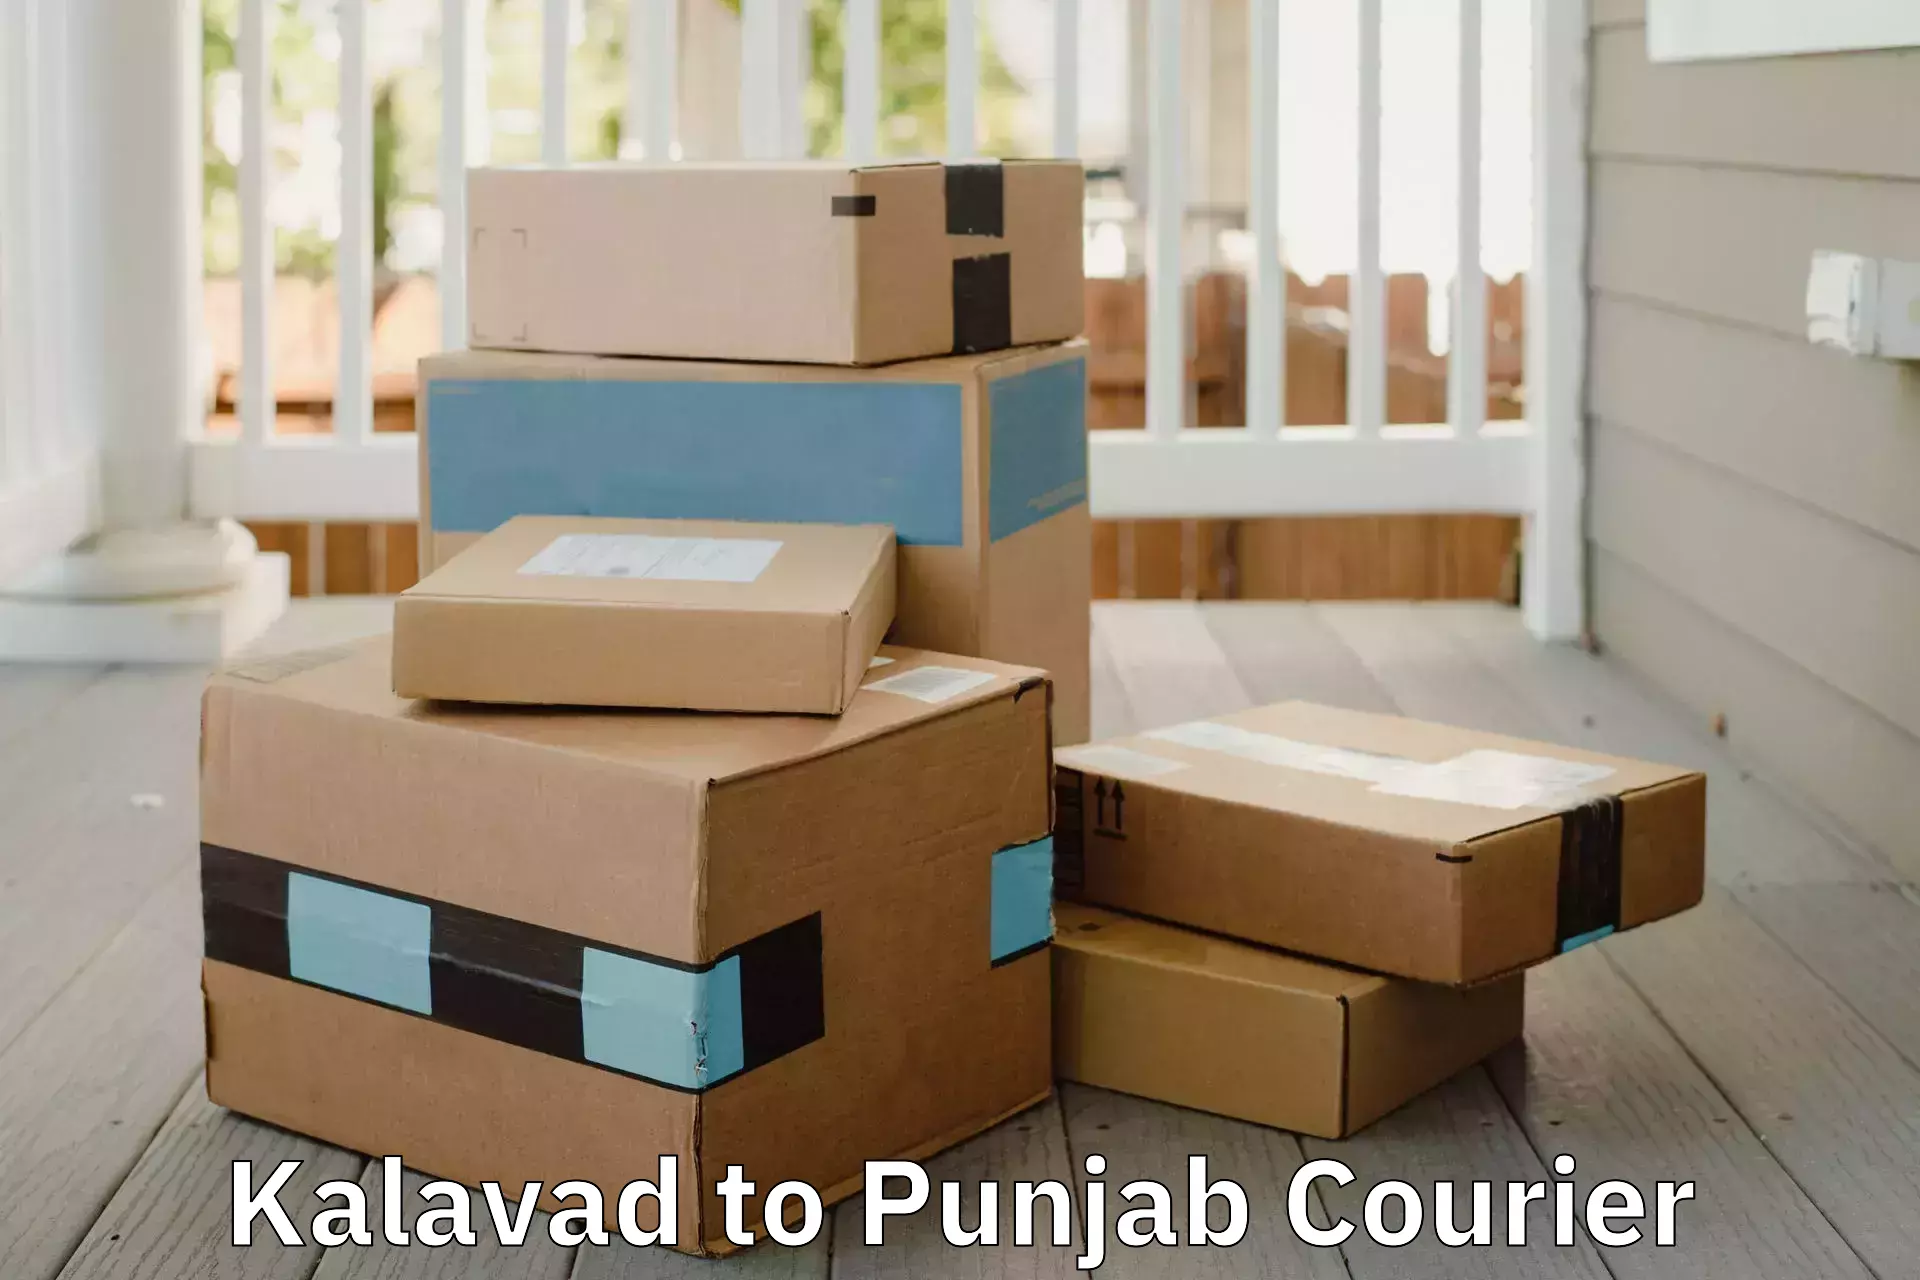 Quality relocation services in Kalavad to Punjab